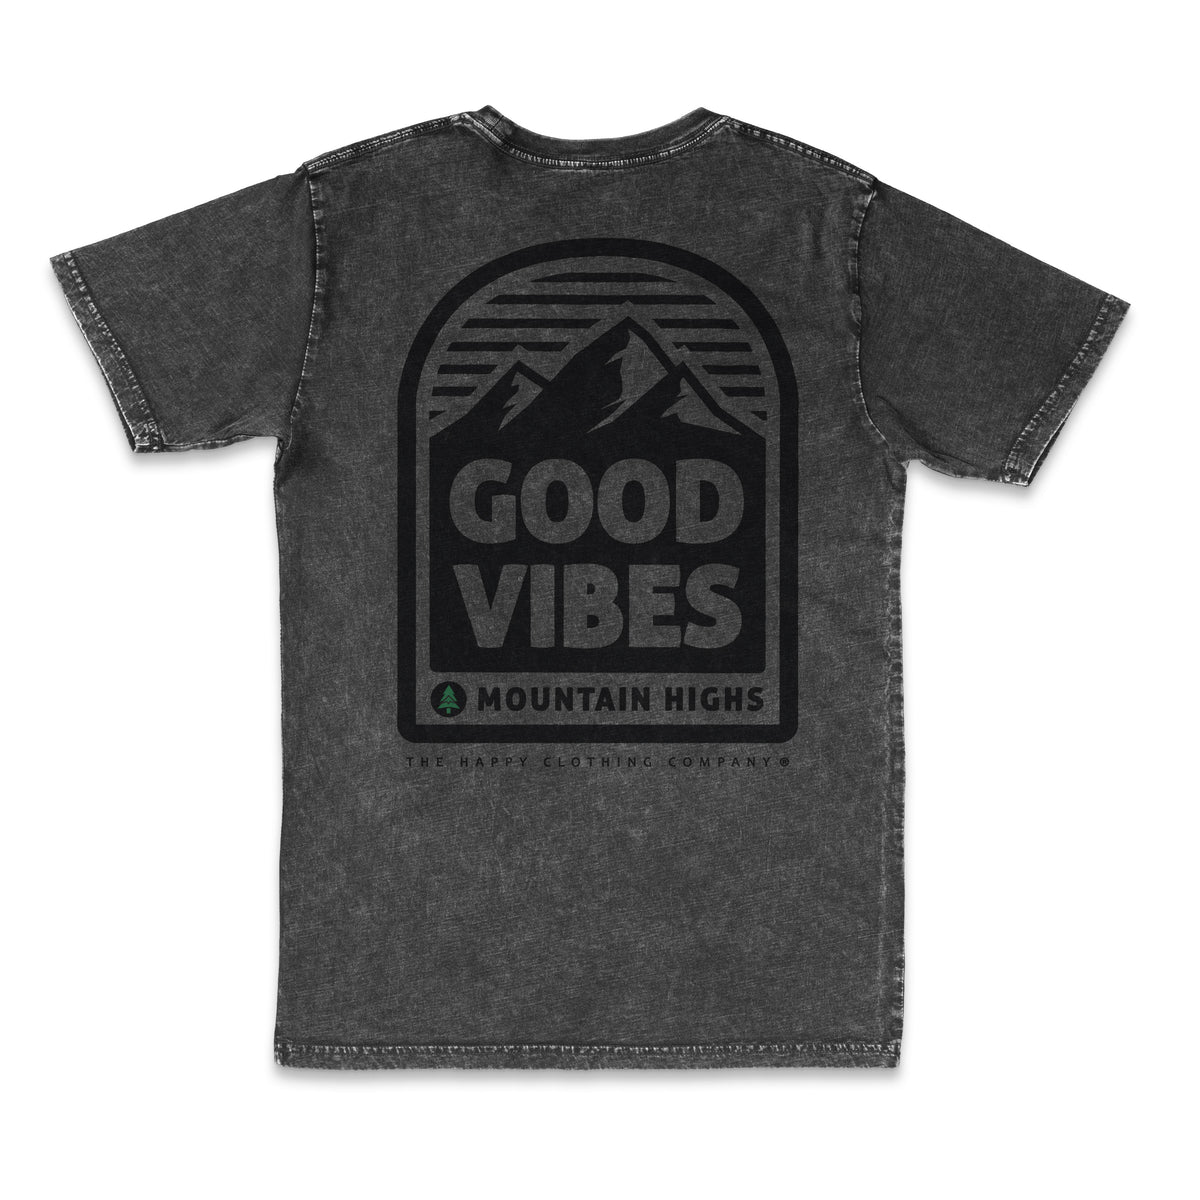 Good Vibes &amp; Mountain Highs Back Print Lightweight Stone Wash Cotton Tee